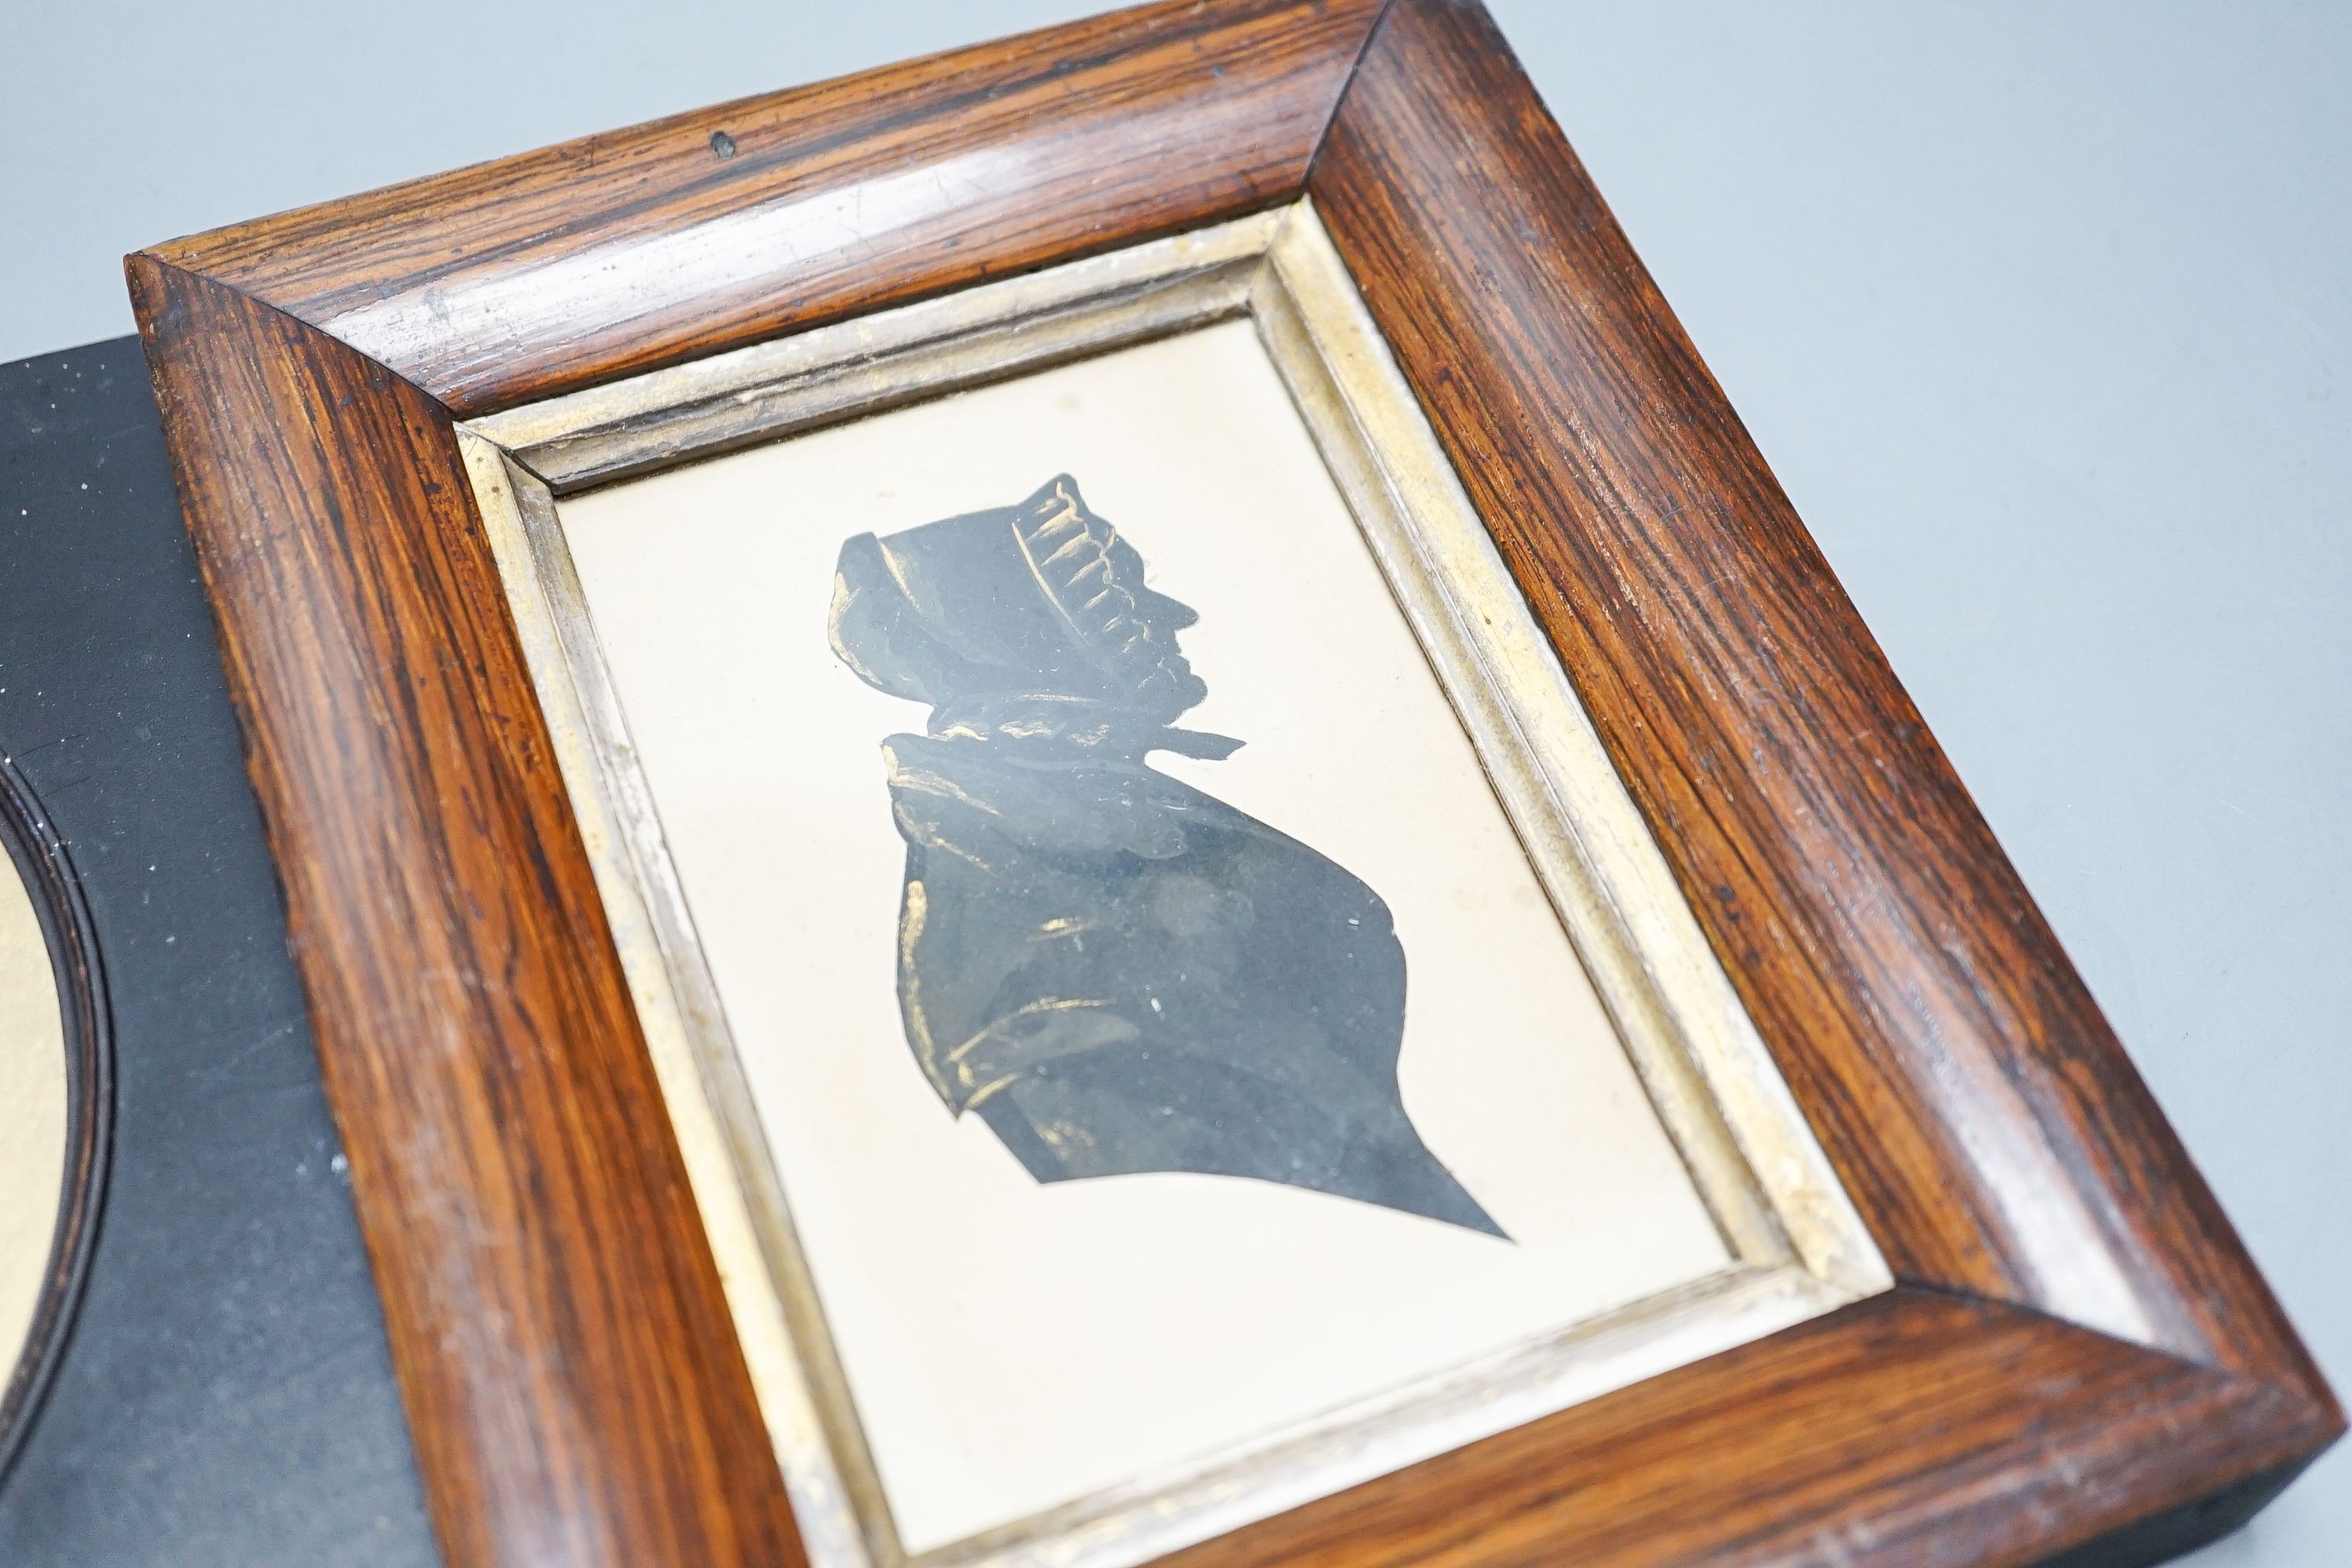 Two Victorian silhouette portraits and a printed monochrome portrait bust, all framed - Image 4 of 4